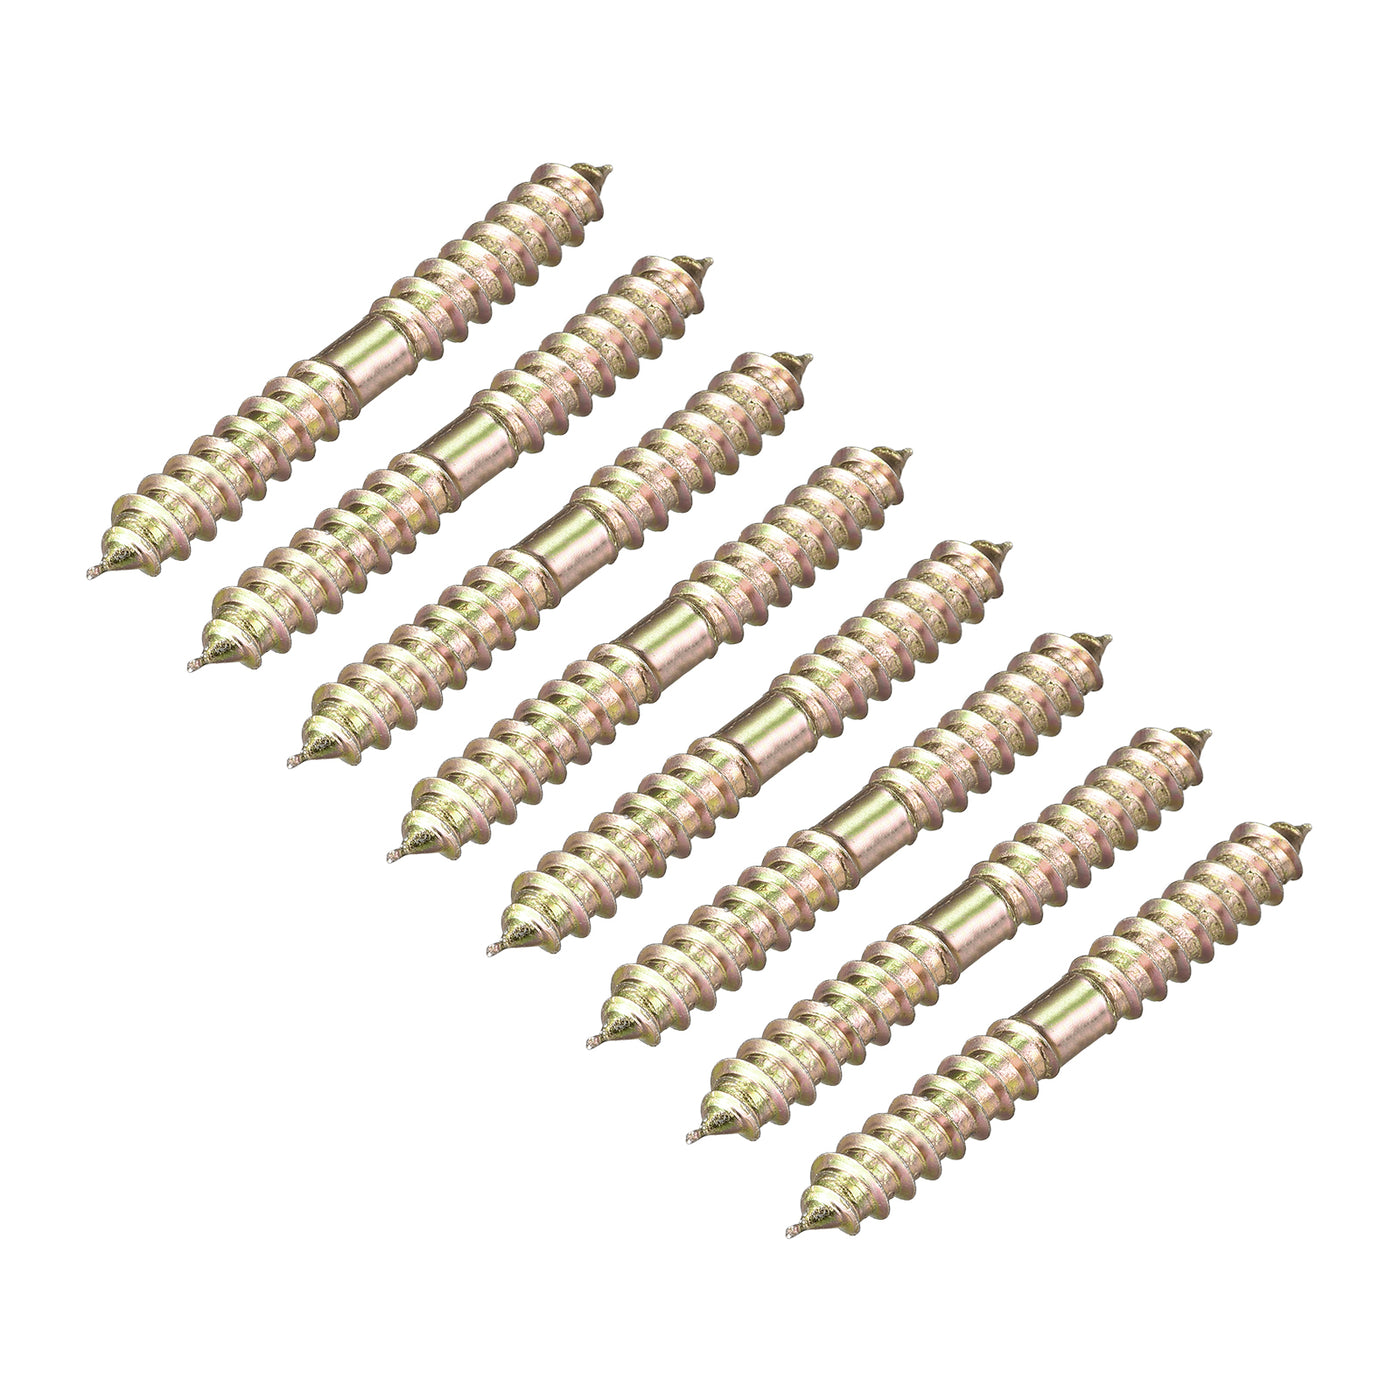 Uxcell Uxcell 8x27mm Hanger Bolts, 8pcs Double Ended Self-Tapping Thread Dowel Screws